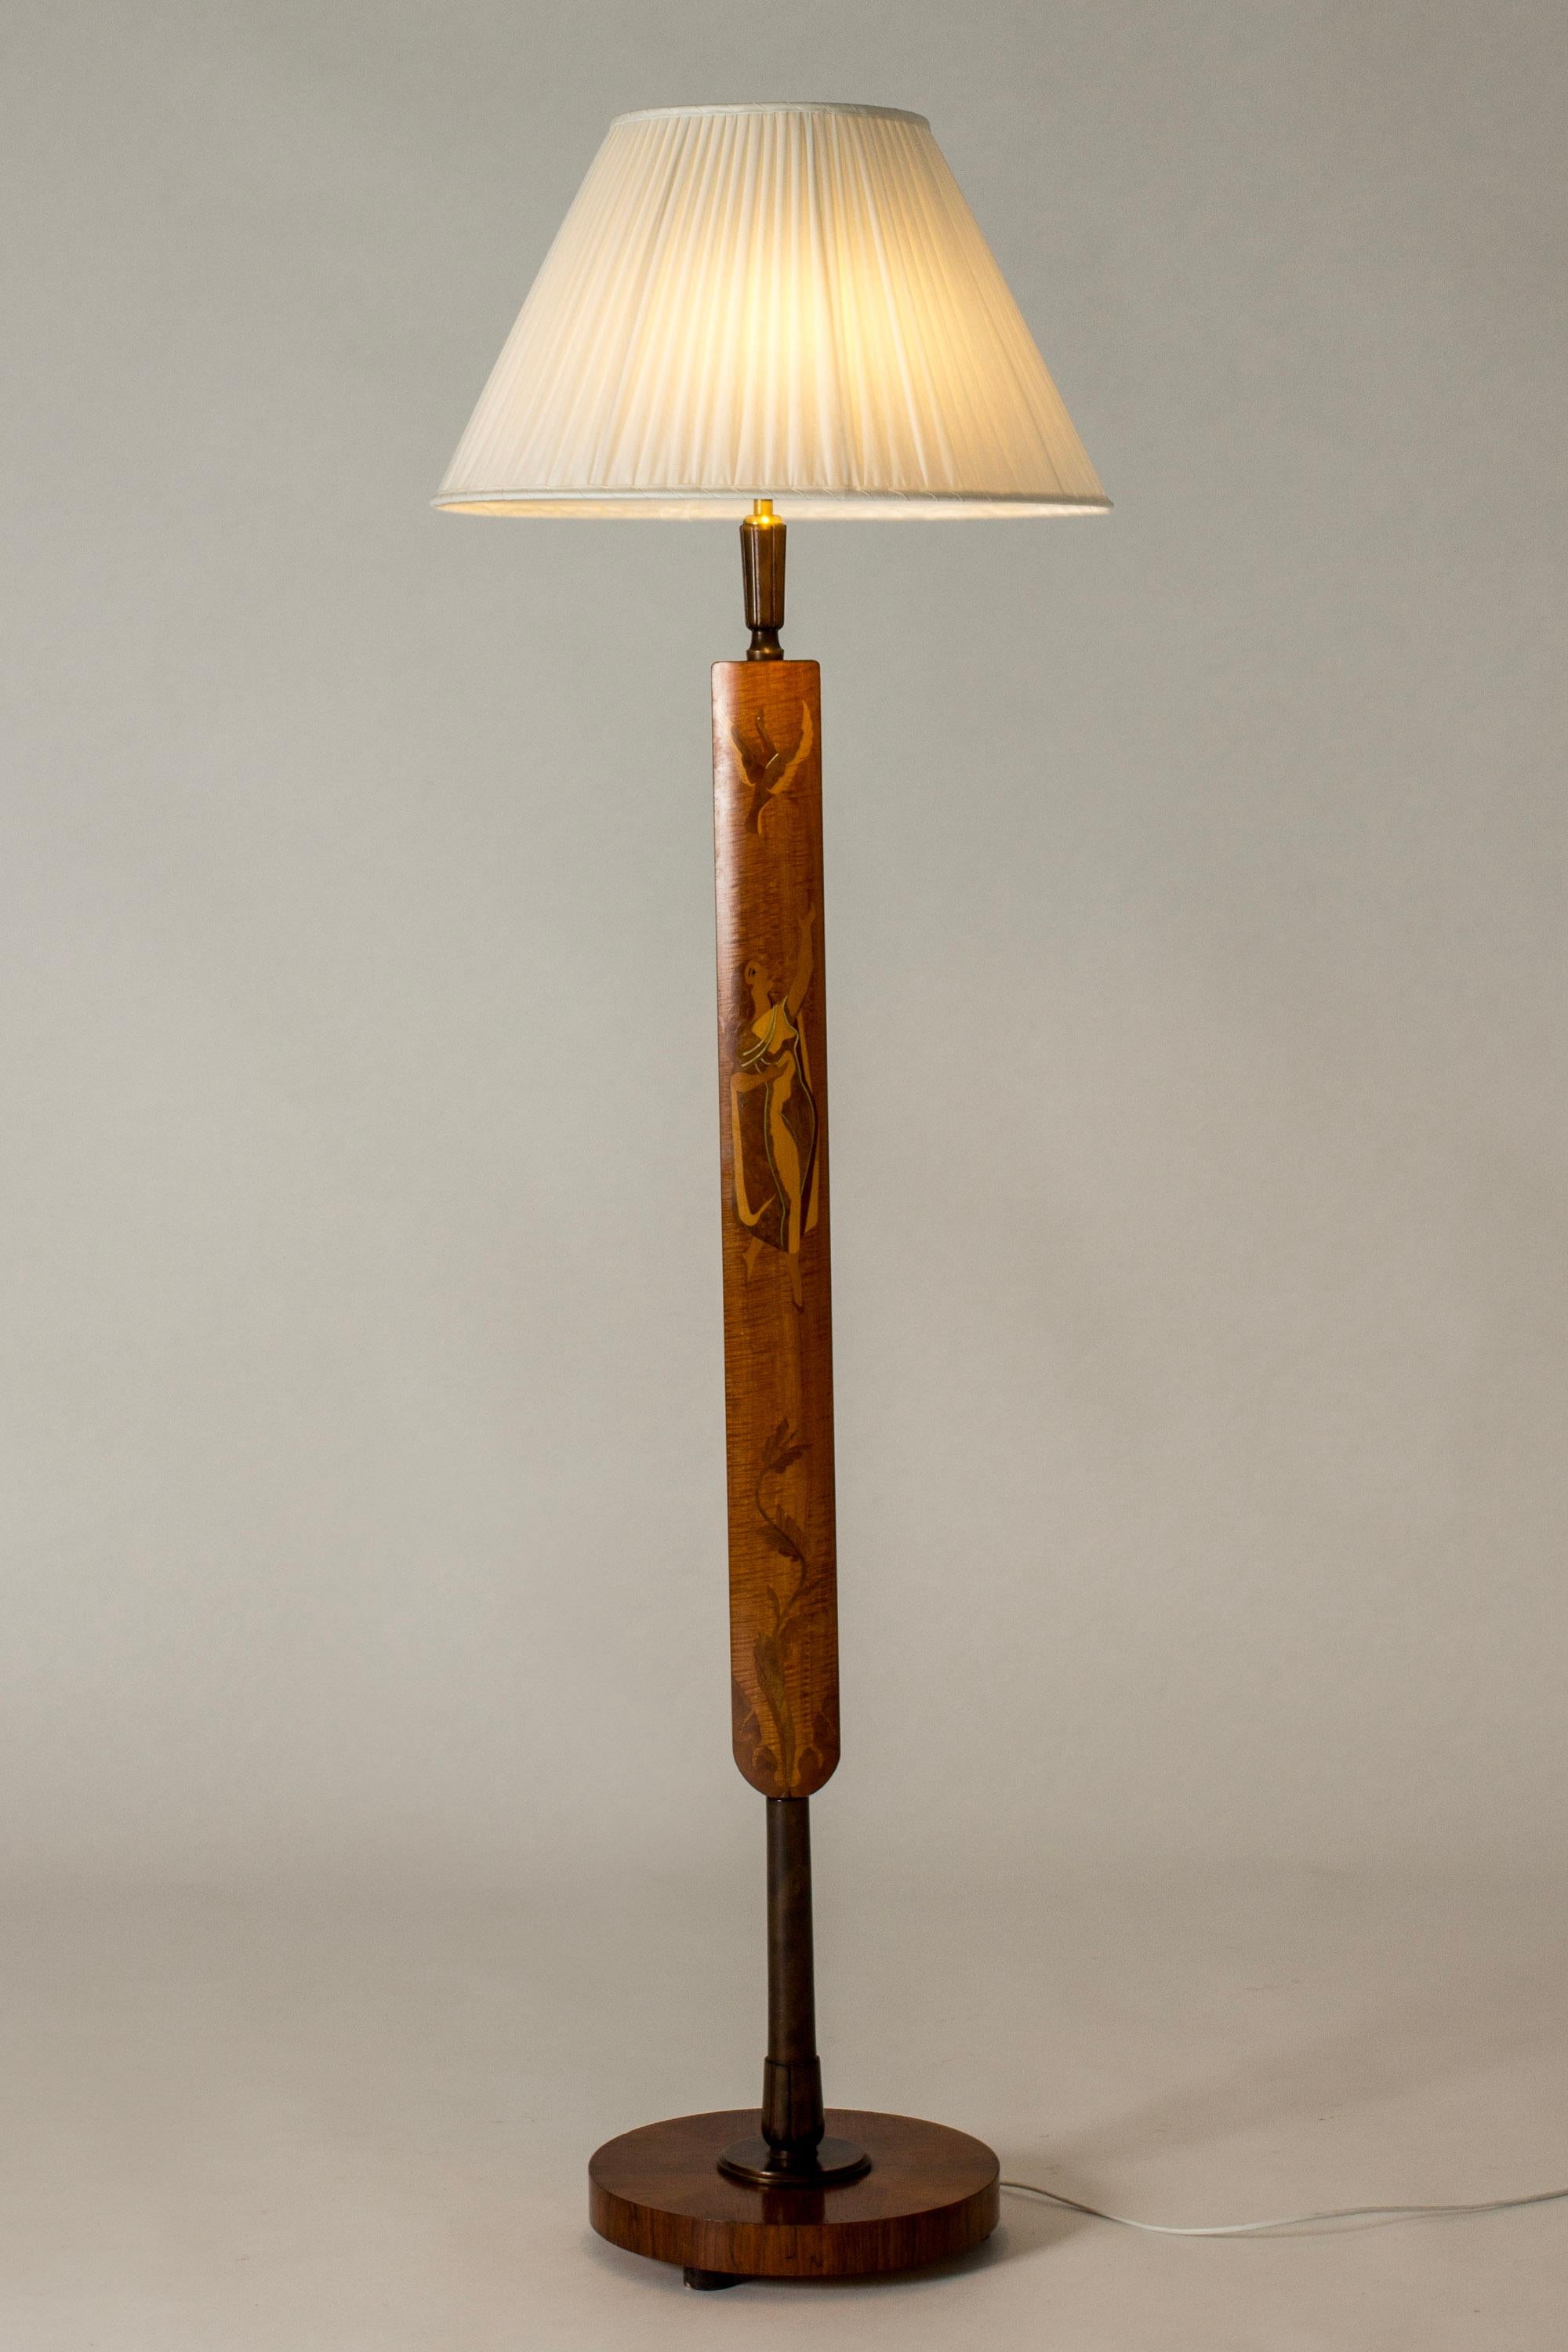 Swedish Modern floor lamp with inlays, Mjölby Intarsia, Sweden, 1930s For Sale 4